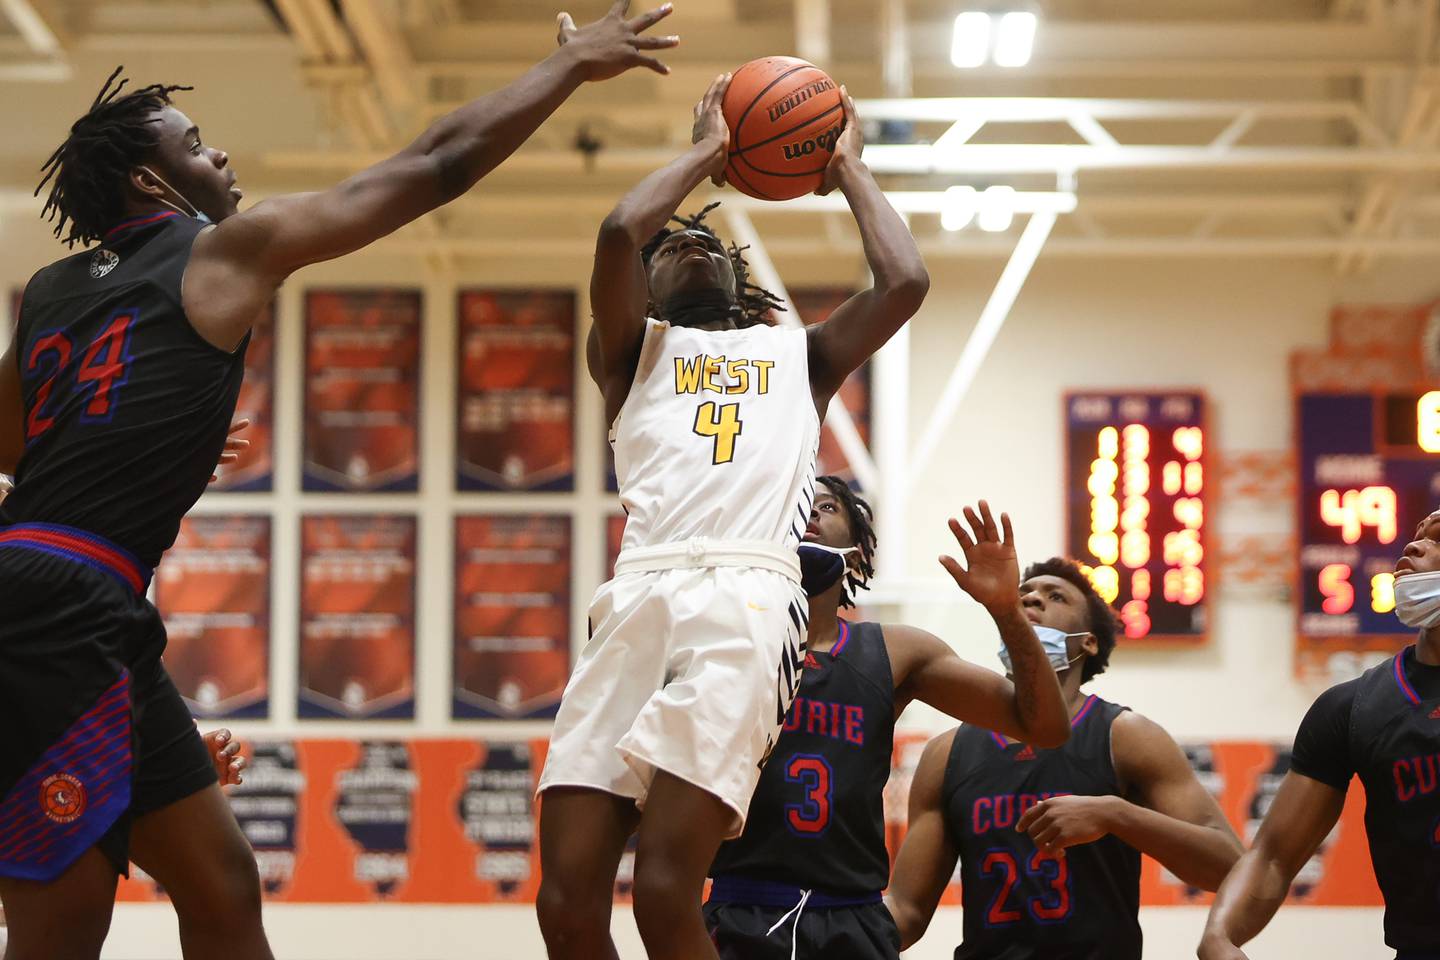 Joliet West's Toby Onyekonwu goes up for the shot against Curie. Saturday, Jan. 15, 2022 in Romeoville.